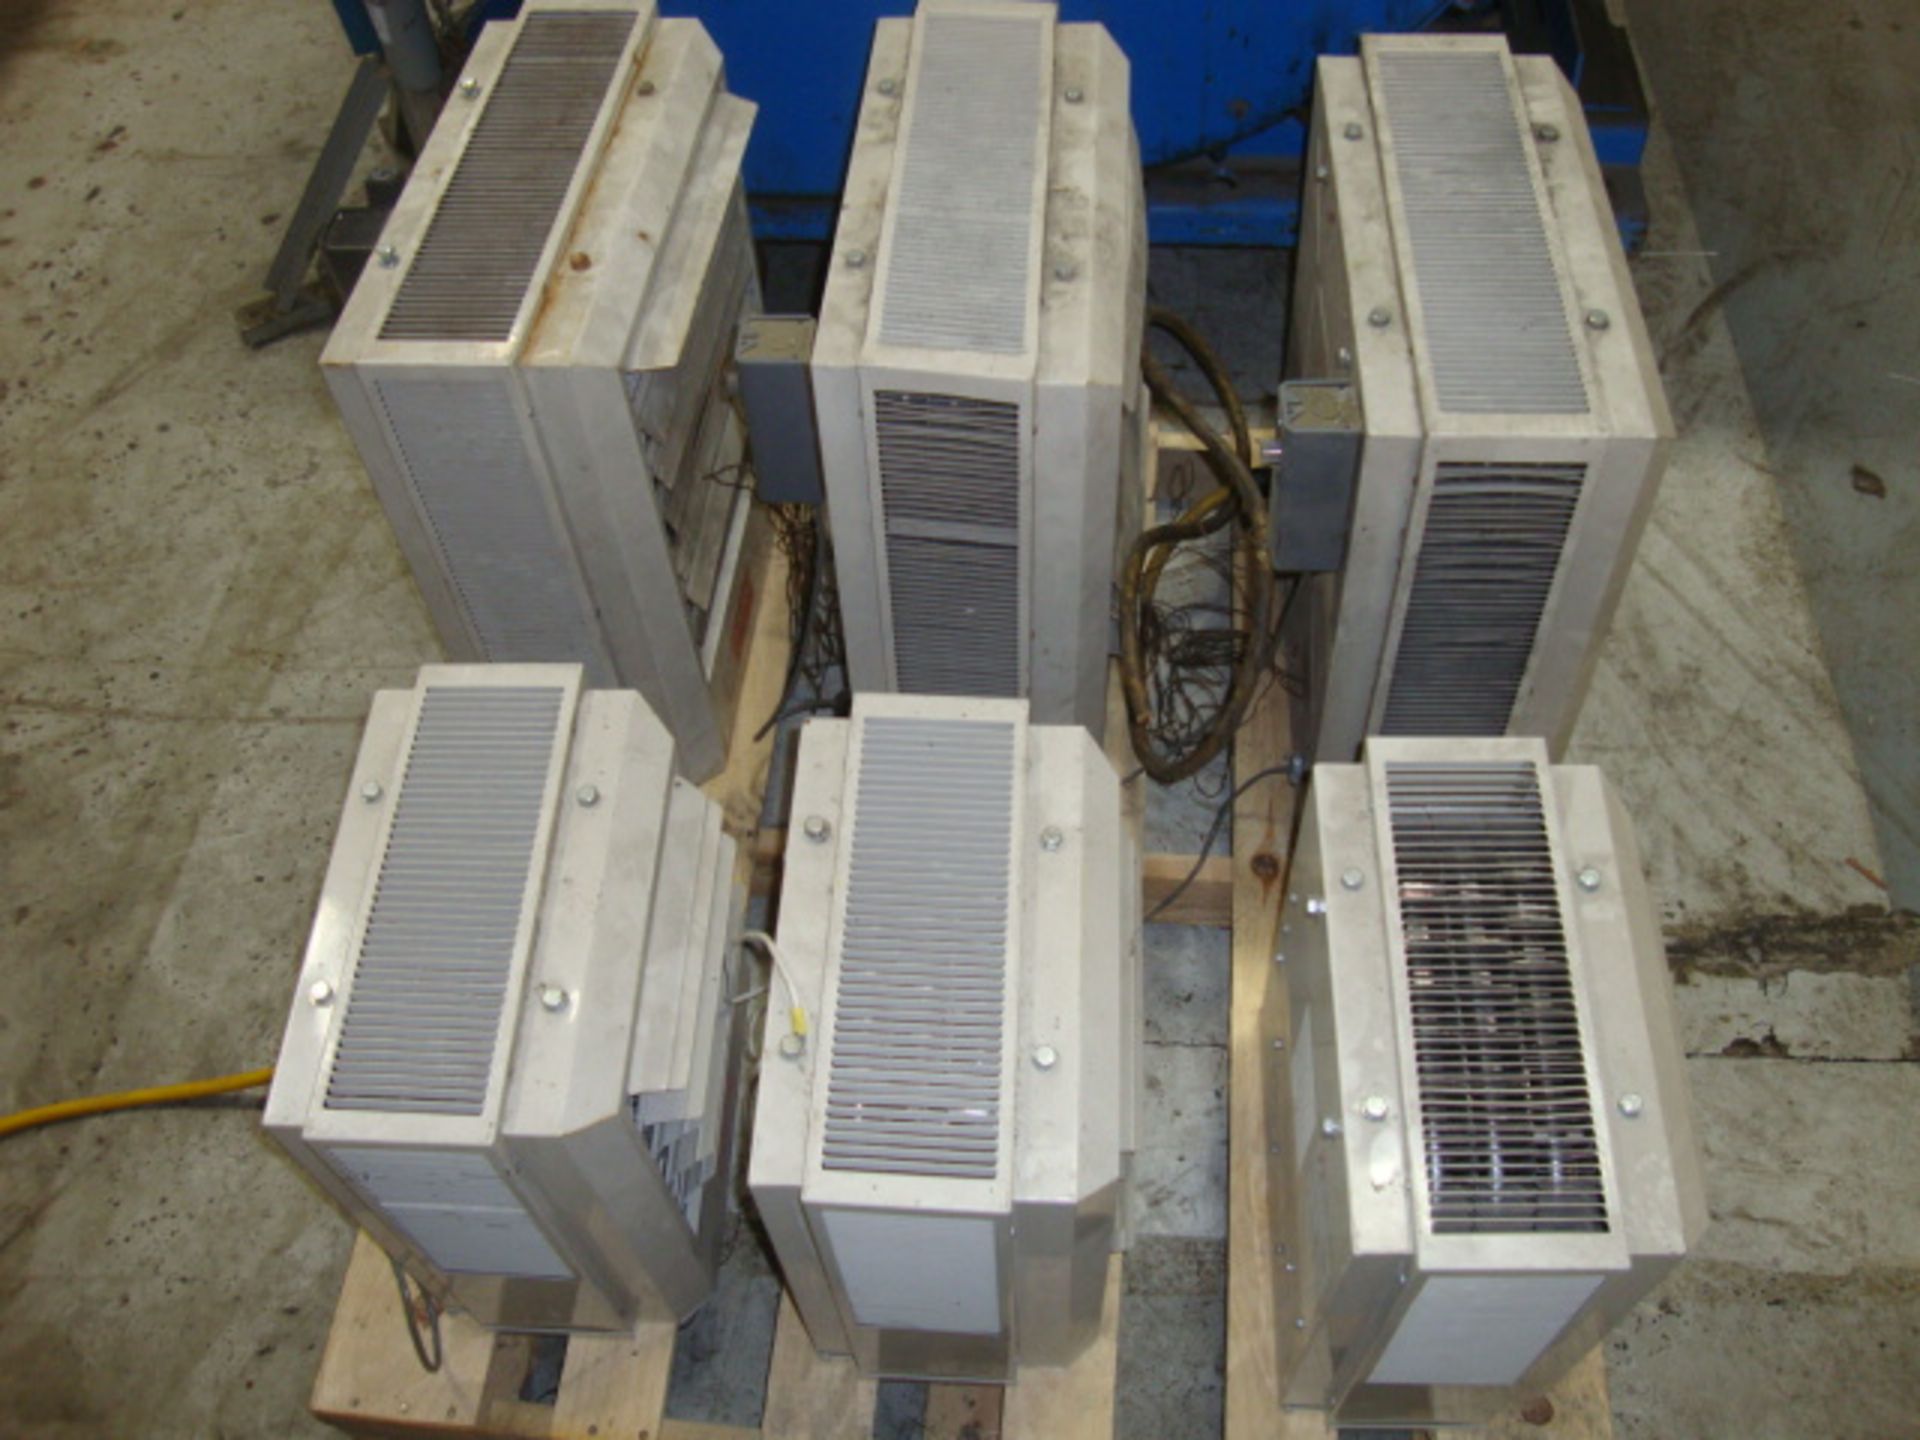 Lot of 6 Dayton Electric Heaters, 3 Model 3UF87 and 3 Model # 2YU63, 480V, 3ph - Image 2 of 3